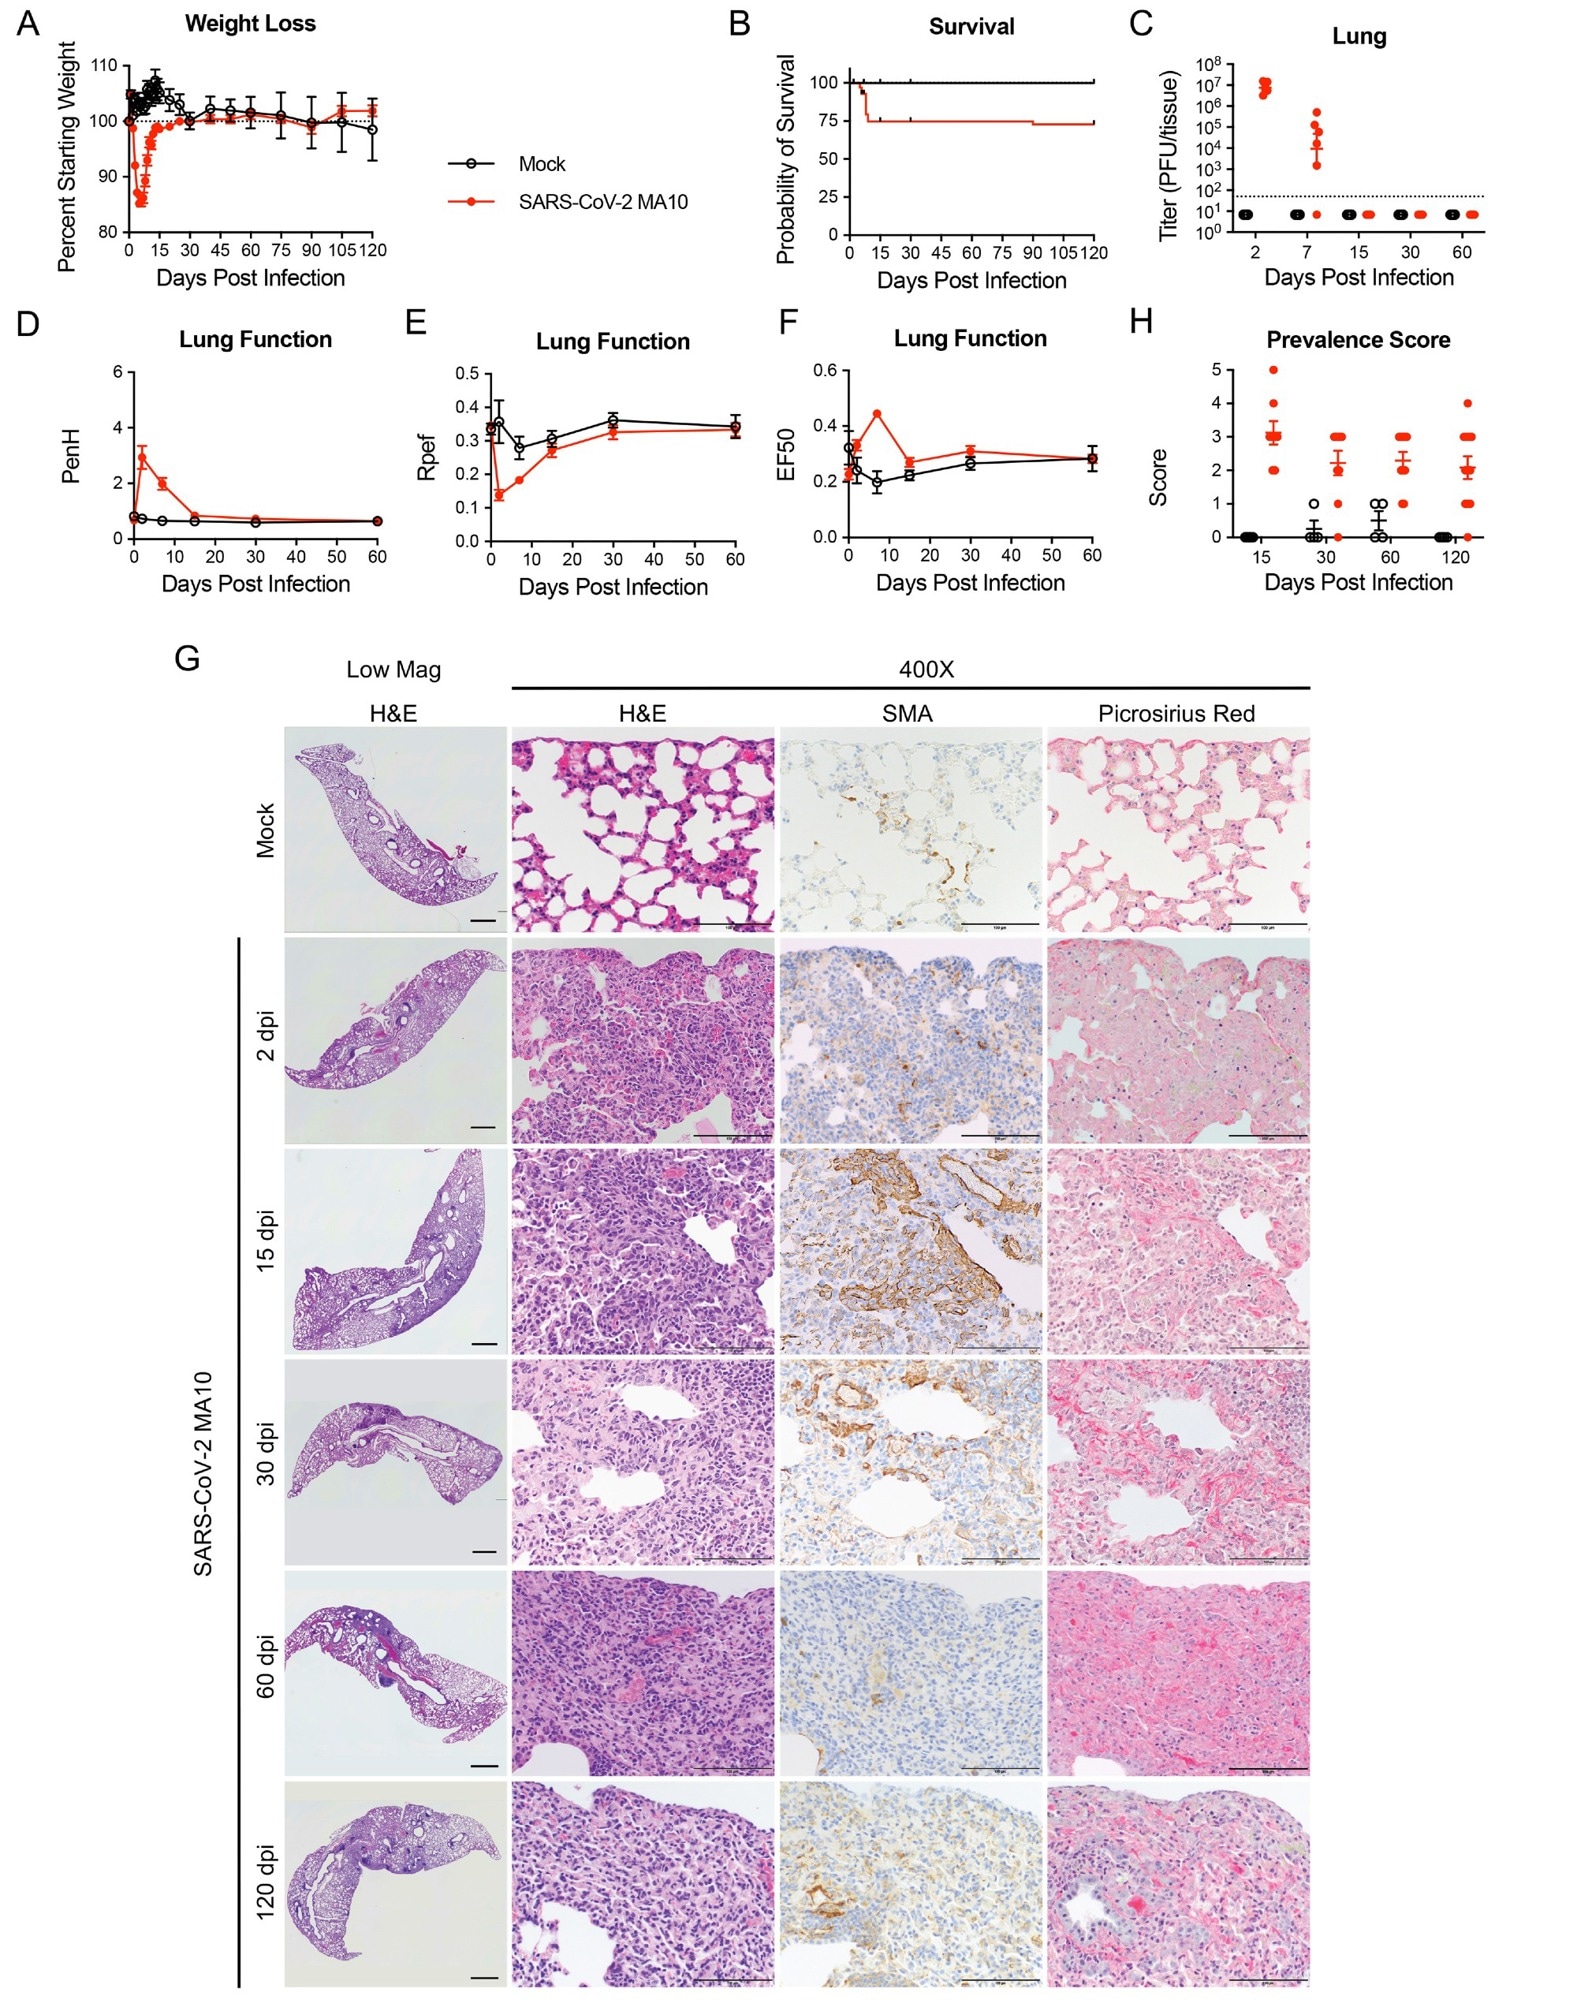 SARS-CoV-2 MA10 infection causes lung damage in aged surviving mice. 1-year-old female BALB/c mice were infected with 103 PFU SARS-CoV-2 MA10 (n=74) or PBS (n=24) and monitored for (A) percent starting weight and (B) survival. (C) Log transformed infectious virus lung titers were assayed at indicated time points. Dotted line represents LOD. Undetected samples are plotted at half the LOD. (D to F) Lung function was assessed by whole-body plethysmography for (D) PenH, (E) Rpef, and (F) EF50. (G) Histopathological analysis of lungs at indicated time points are shown. H&E indicates hematoxylin and eosin staining. SMA indicates DAB-labeling (brown) immunohistochemistry for α-smooth muscle actin. Picrosirius Red staining (bright pink-red) highlights collagen fibers. Image scale bars represents 1000 μm for low magnification and 100 μm for 400X images. (H) Disease incidence scoring is shown for indicated time points: 0 = 0% of total area of examined section, 1 = less than 5%; 2 = 6 to 10%; 3 = 11 to 50%; 4 = 51 to 95%; 5 = greater than 95%. Graphs represent individuals necropsied at each time point (C and H), with the average value for each treatment and error bars representing standard error of the mean. Mock infected animals represented by open black circles and SARS-CoV-2 MA10 infected animals are represented by closed red circles.